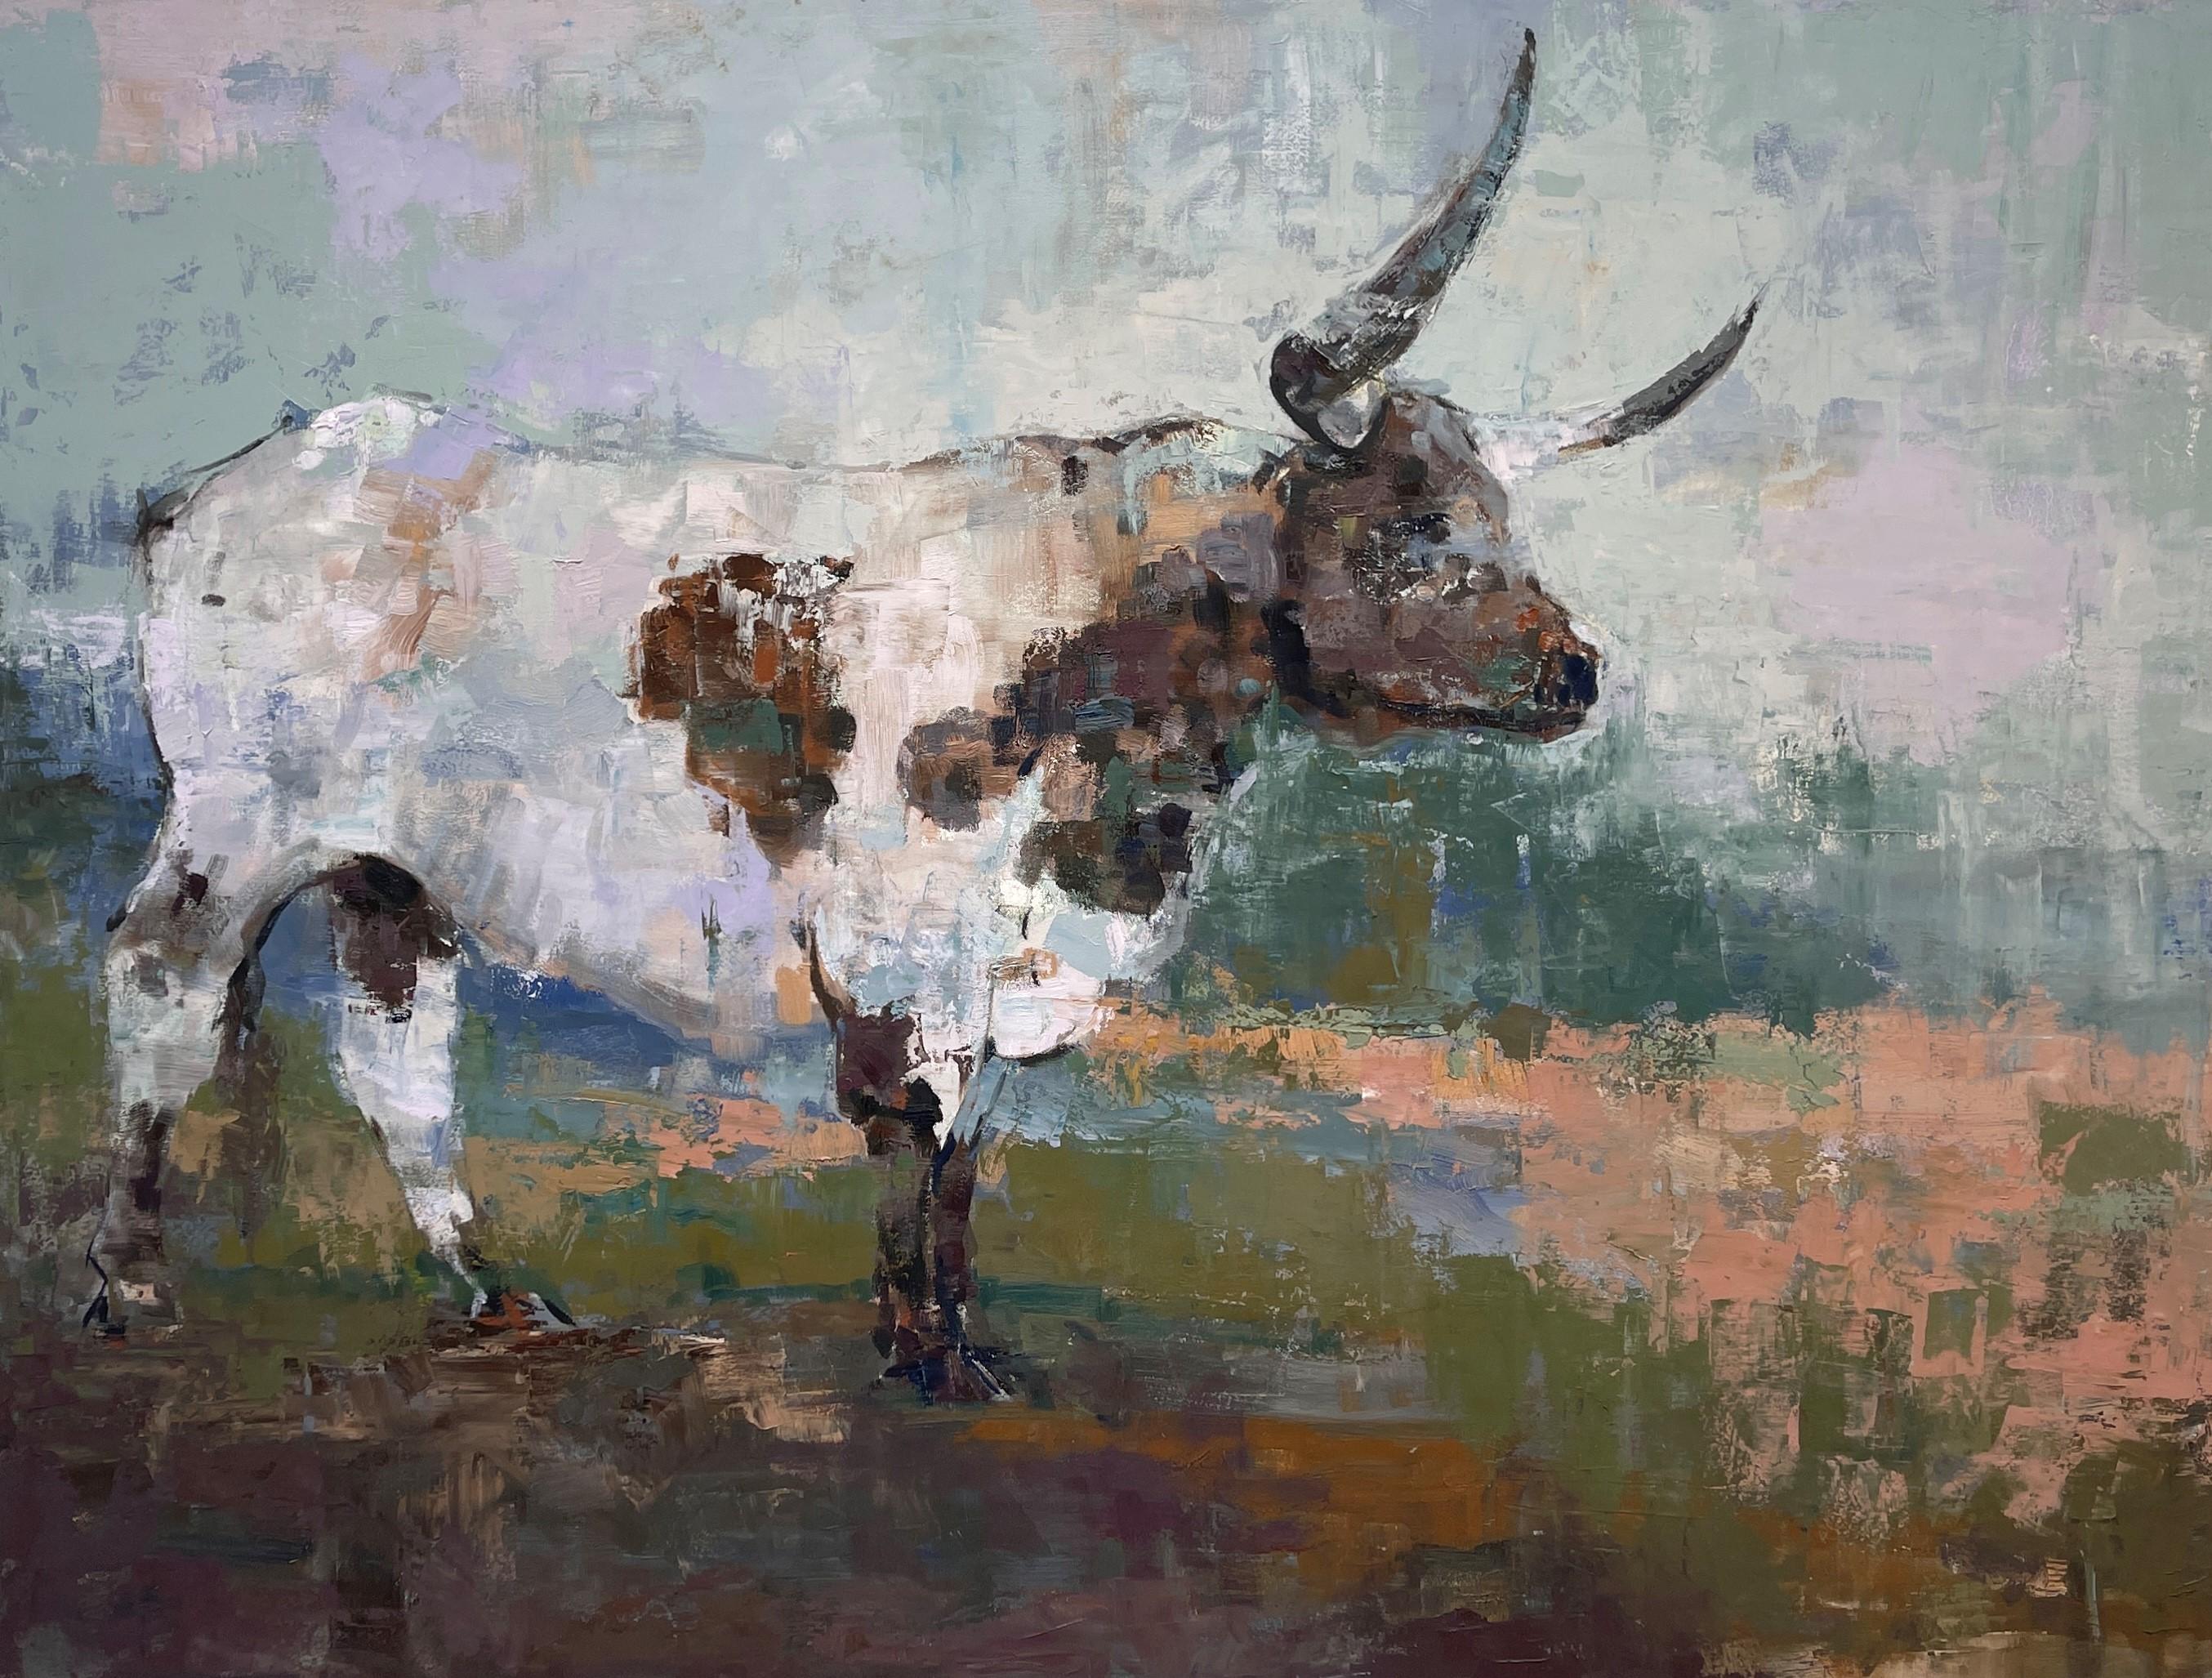 Brian Keith Stephens Figurative Painting - "Eye's To The Sky" Longhorn Under Open Sky, Original Oil & Wax Painting